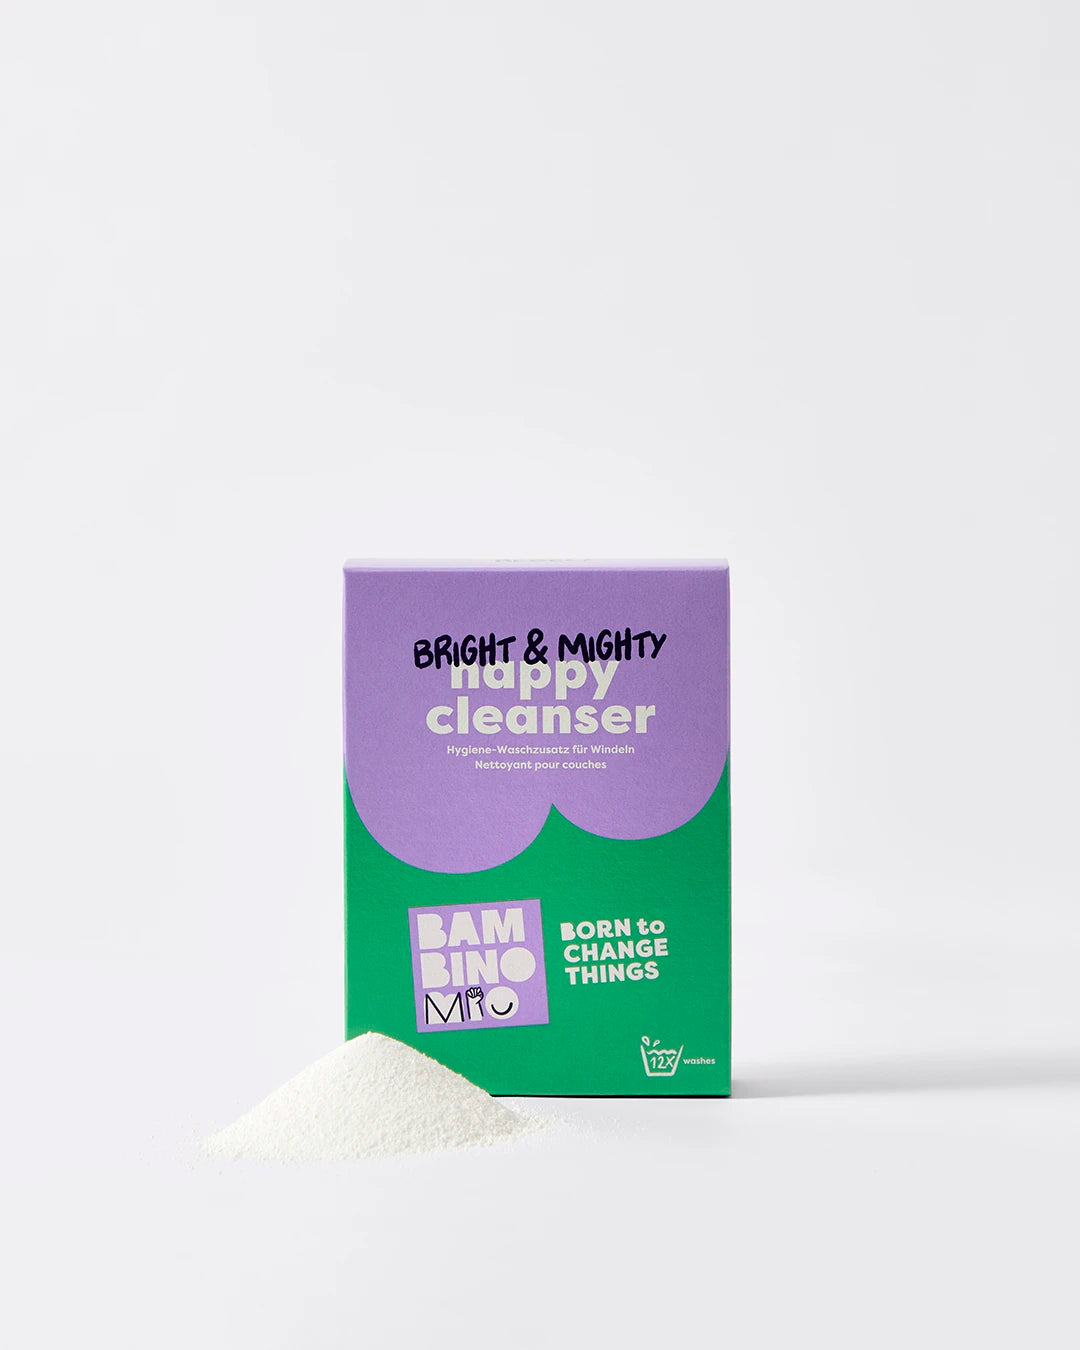 Bright & mighty laundry cleanser 750g